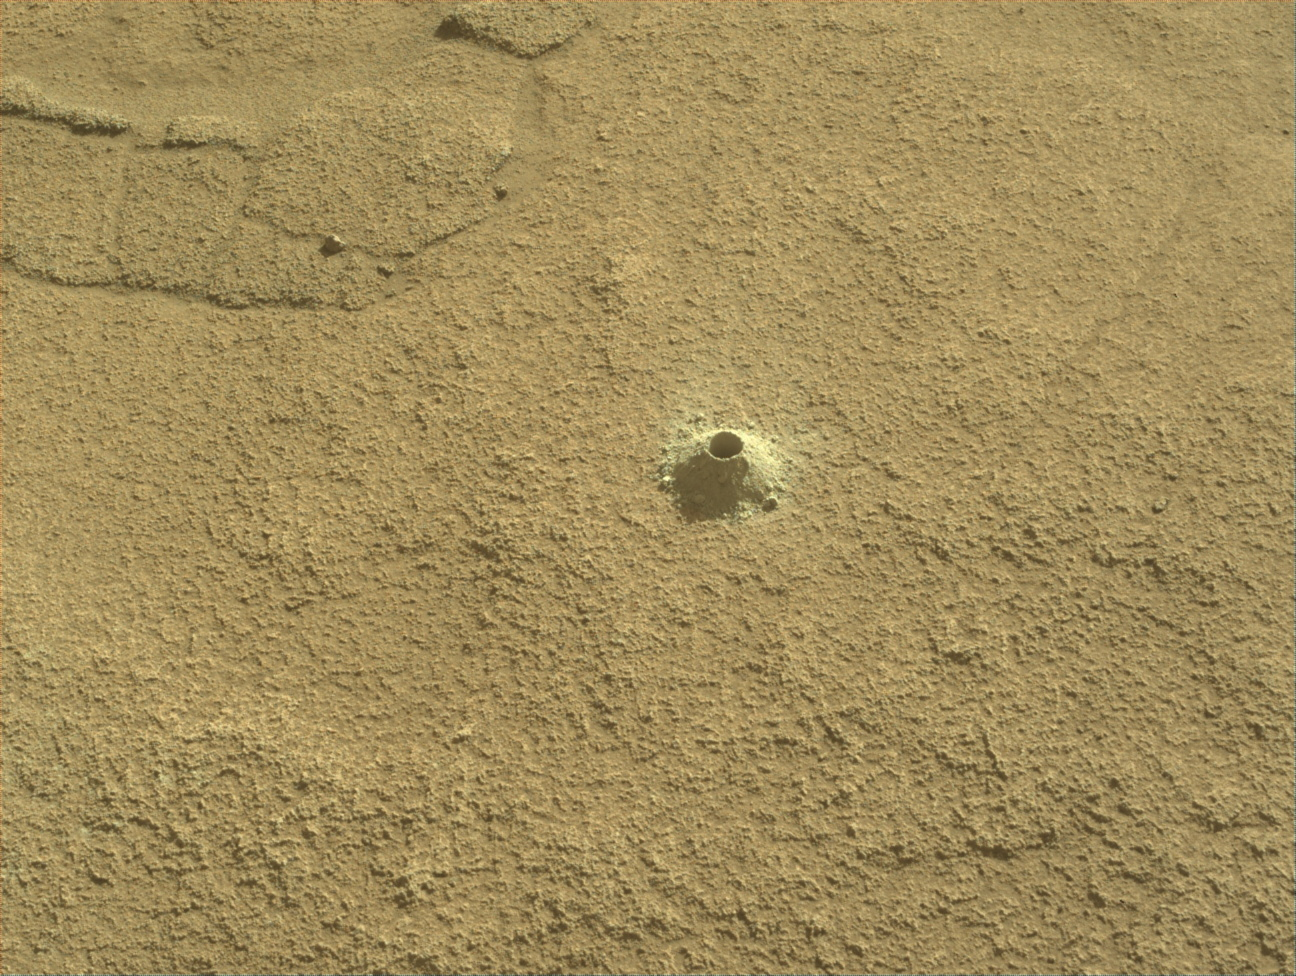 Image taken was taken by the Mars Perseverance rover after collecting the rock sample 22 at Pelican Point. There is a drill hole at the center of the image where the sample was collected.